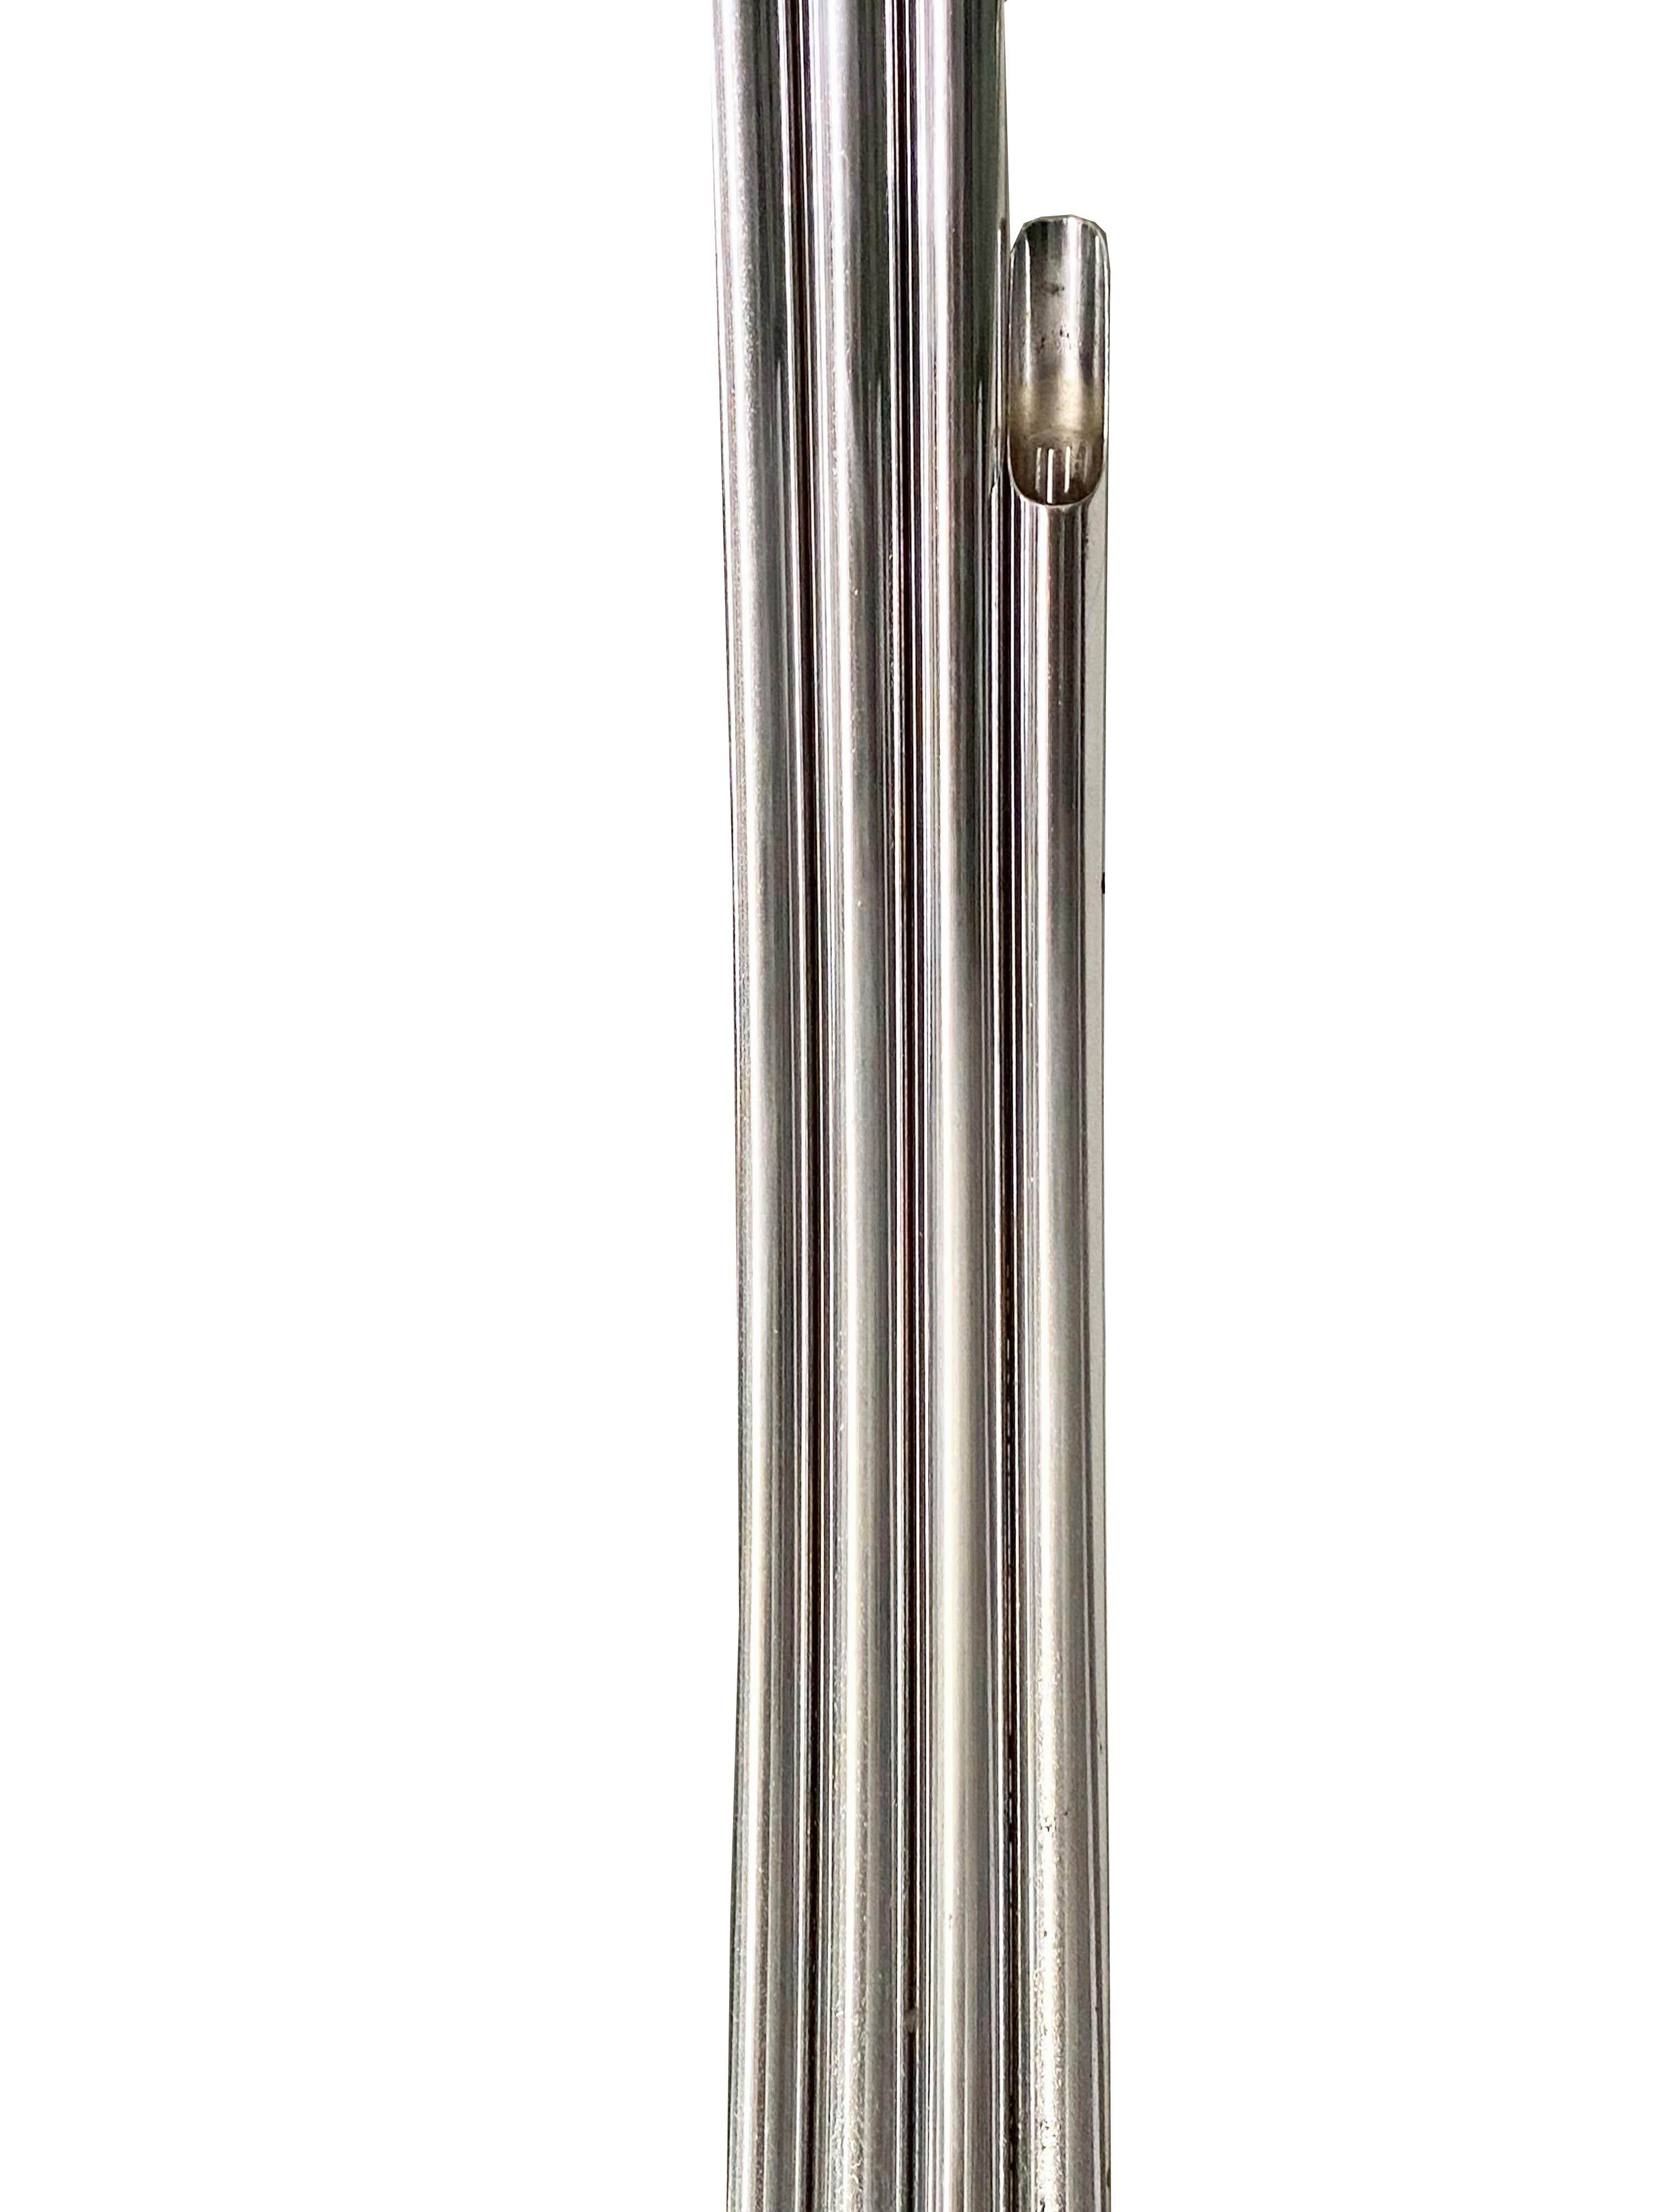 Iconic and elegant Goffredo Reggiani arched floor lamp, 1960s Italy, chromed with painted cast iron base. The four chromed tubular steel sections, all of different lengths, give an animated sense of movement and a wonderful illuminating effect. The